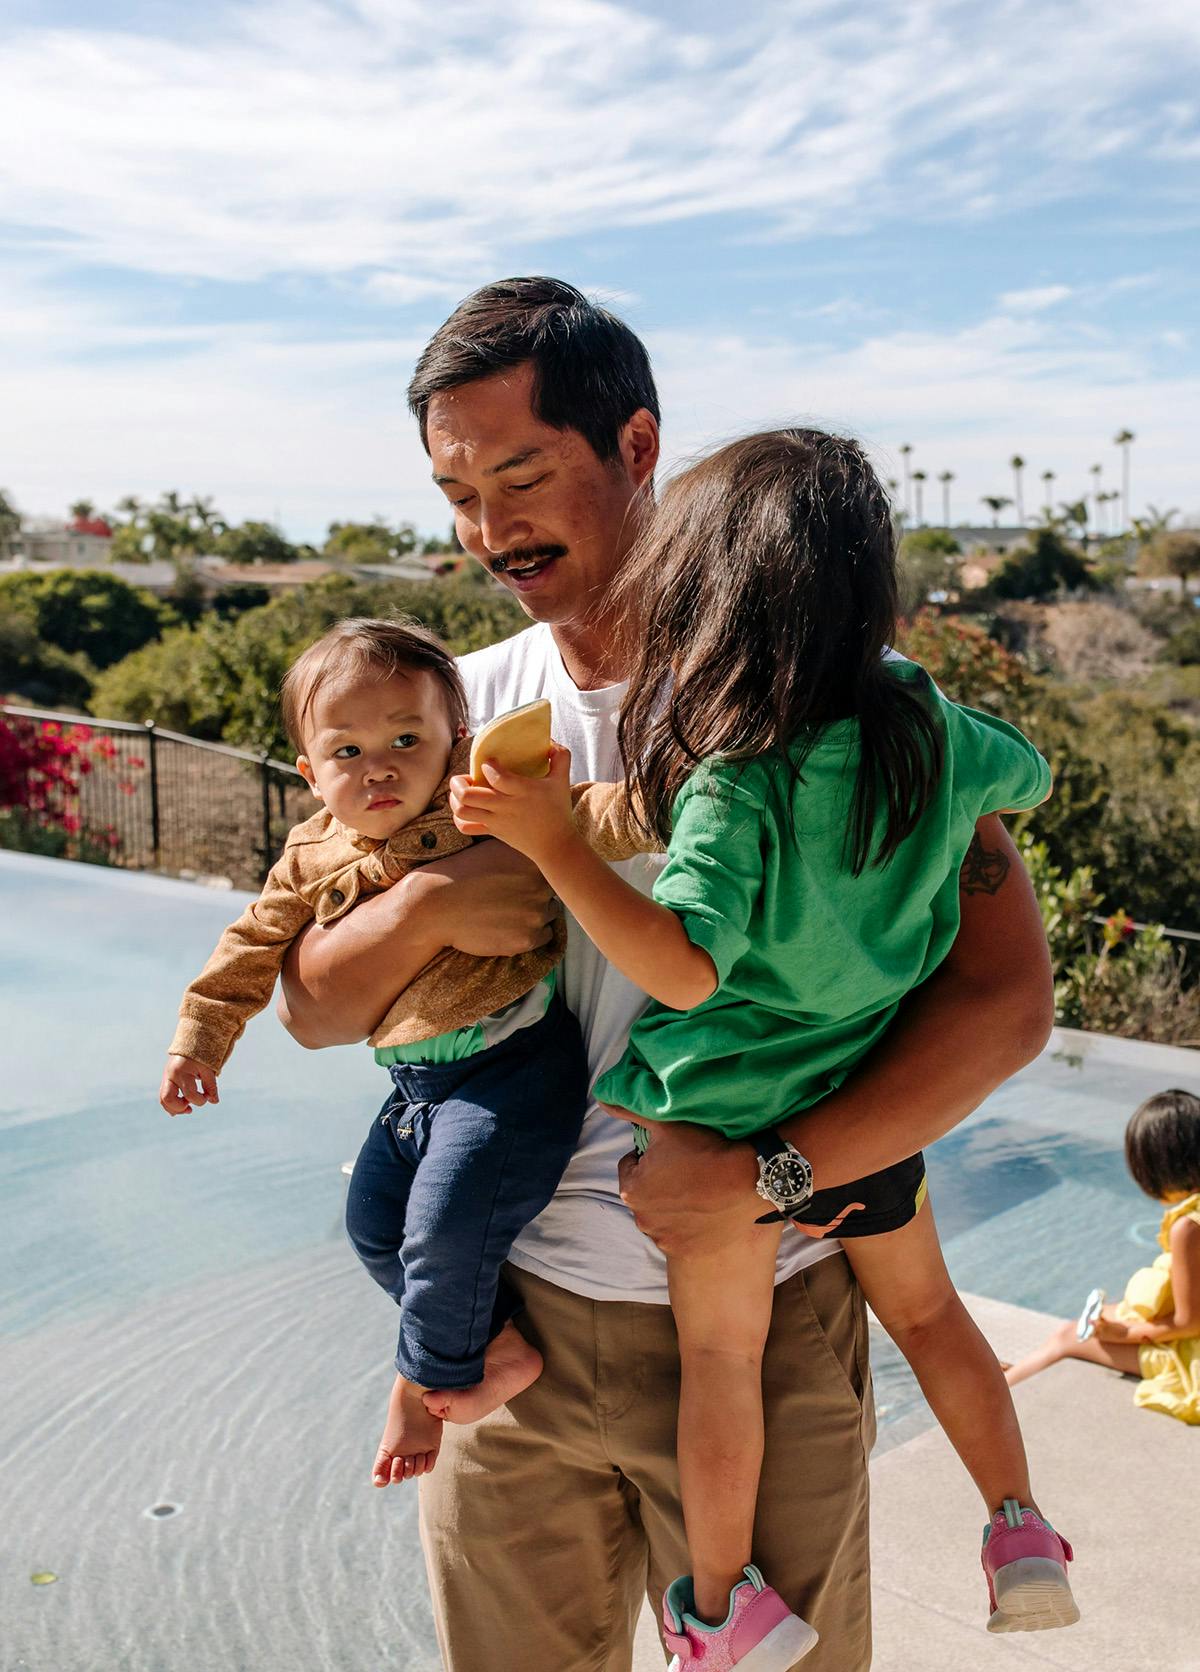 Asian father in his forties carrying his two young children in his arms, while walking by a pool and smiling